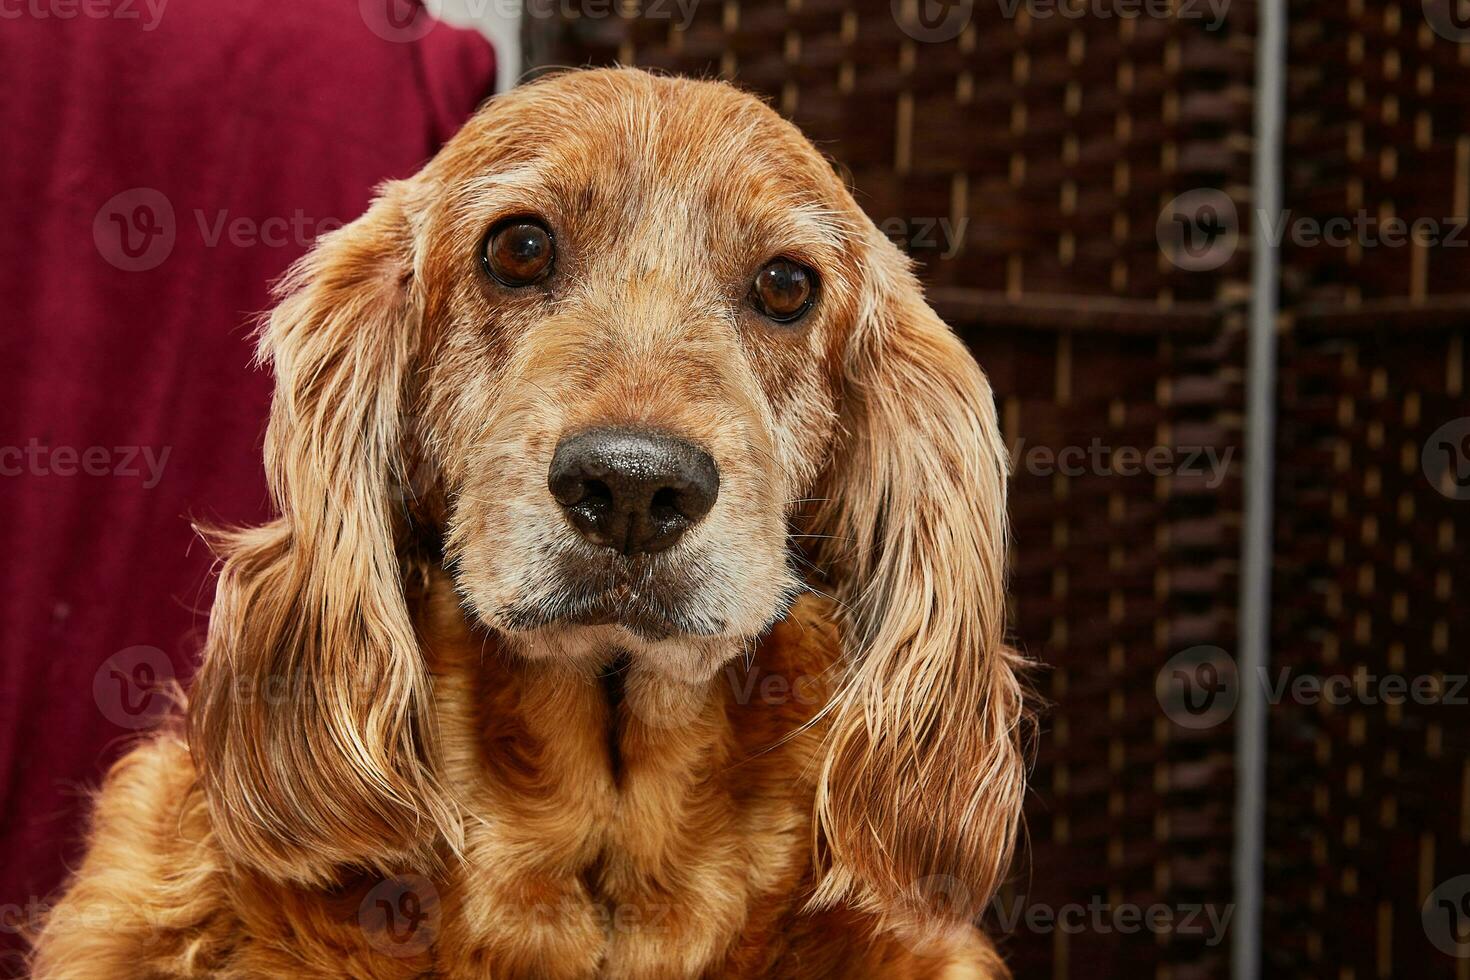 Classic canine relaxation portrait of an English Cocker Spaniel on a vintage armchair photo